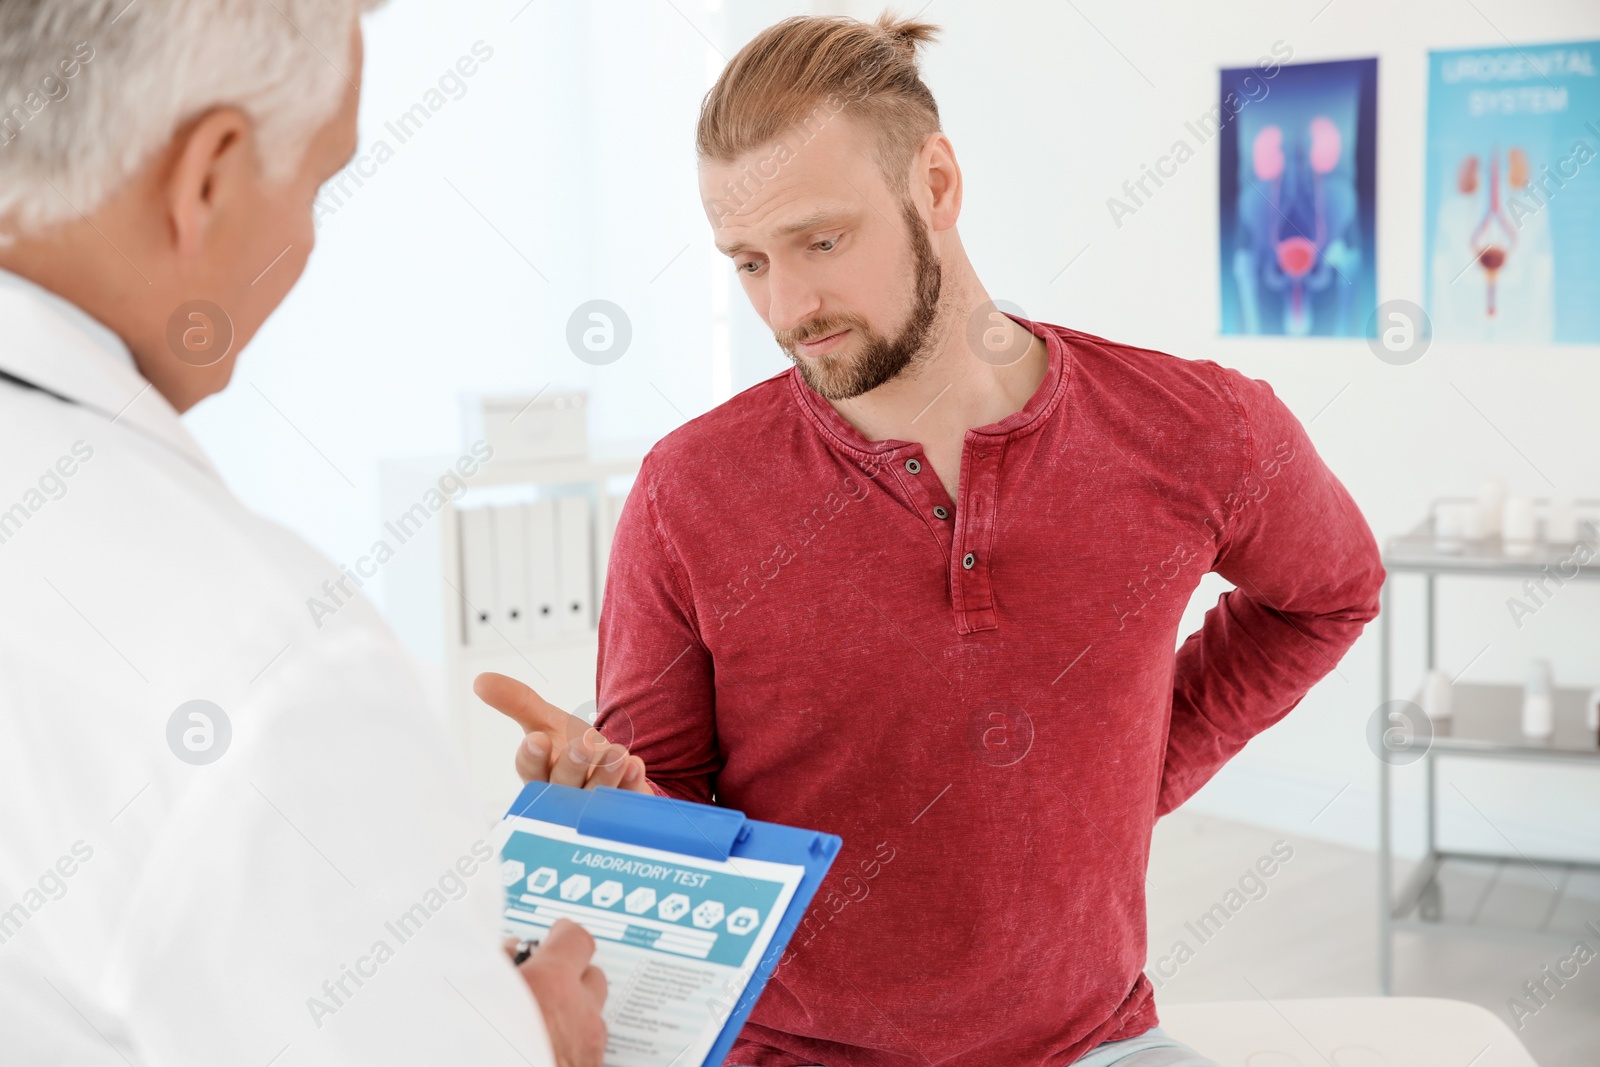 Photo of Man with health problems visiting urologist at hospital